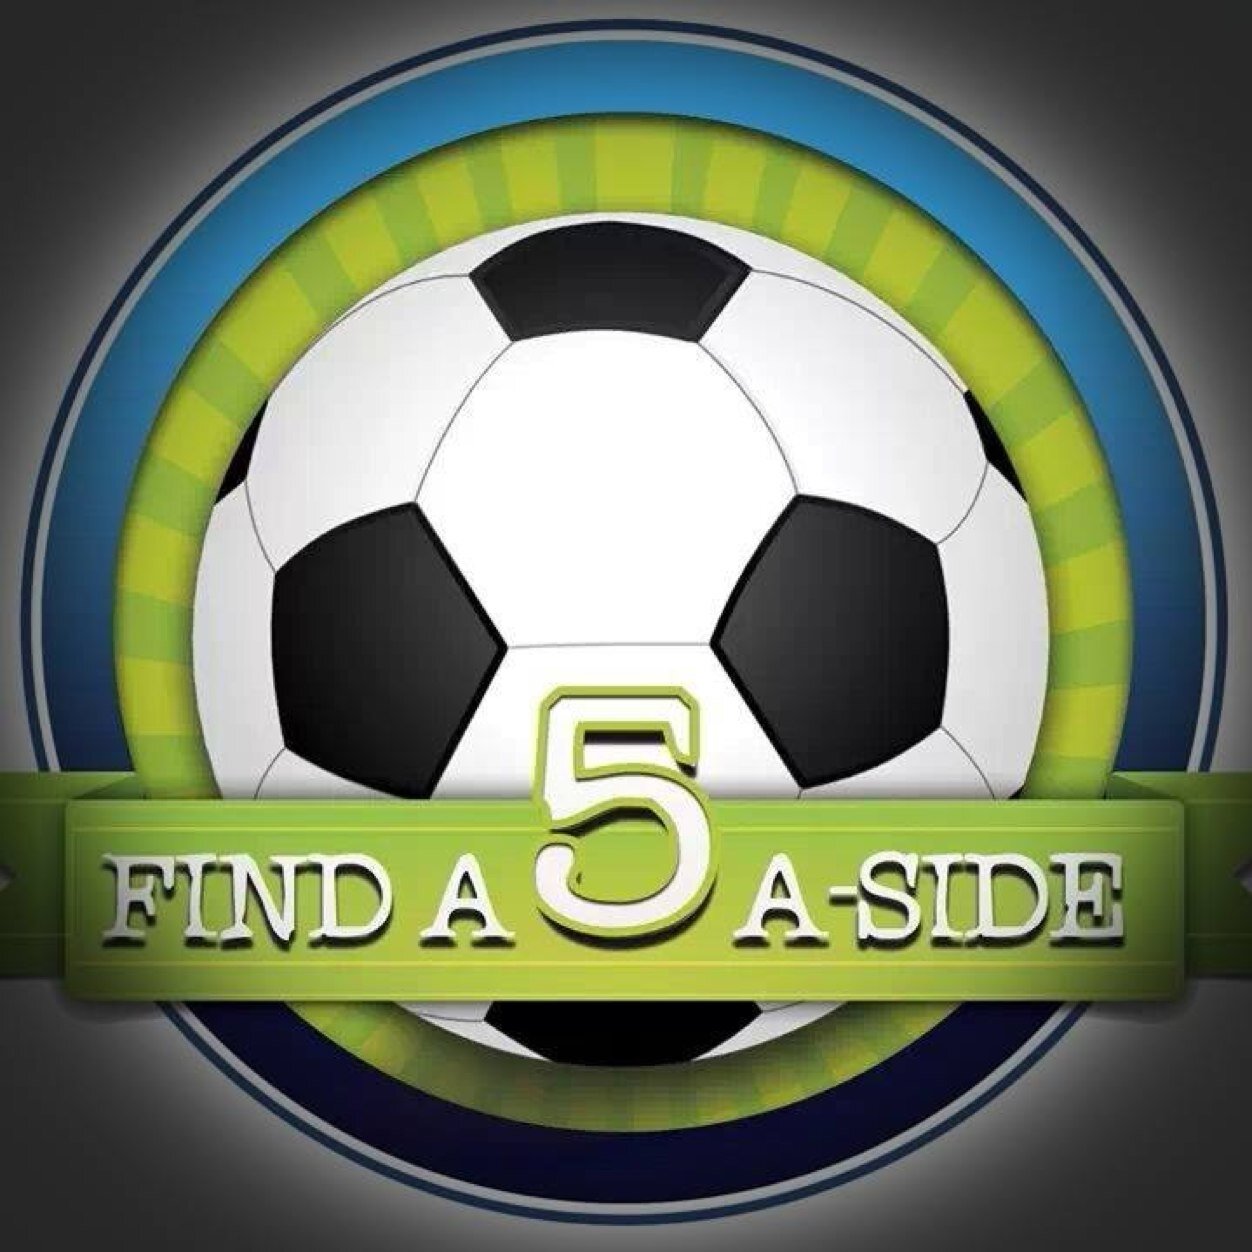 Love football?? Join the UK's first 5-a-side database!! We have a new way to play!!